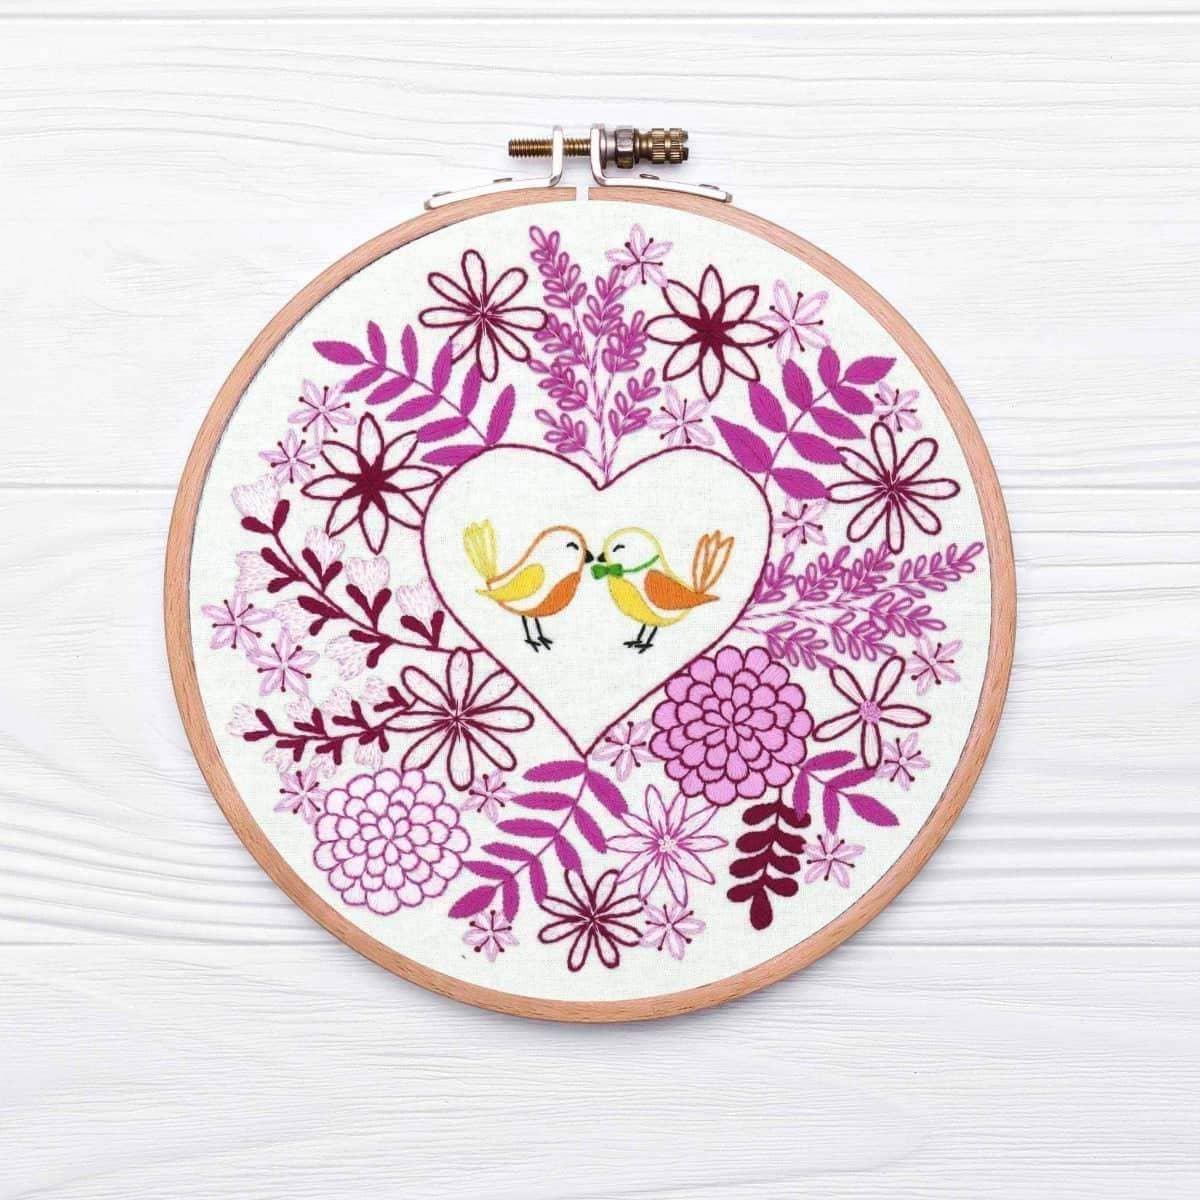 Love Blooms, Pre Printed Embroidery Fabric Panel Pattern , Pre Printed Fabric Pattern , StitchDoodles , Embroidery, embroidery hoop, embroidery hoop kit, embroidery kit for adults, embroidery kit for beginers, embroidery kits for beginners, embroidery pattern, hand embroidery, hand embroidery fabric, hand embroidery seat frame, nurge embroidery hoop, PDF pattern, pre-printed fabric, Printed Pattern , StitchDoodles , shop.stitchdoodles.com